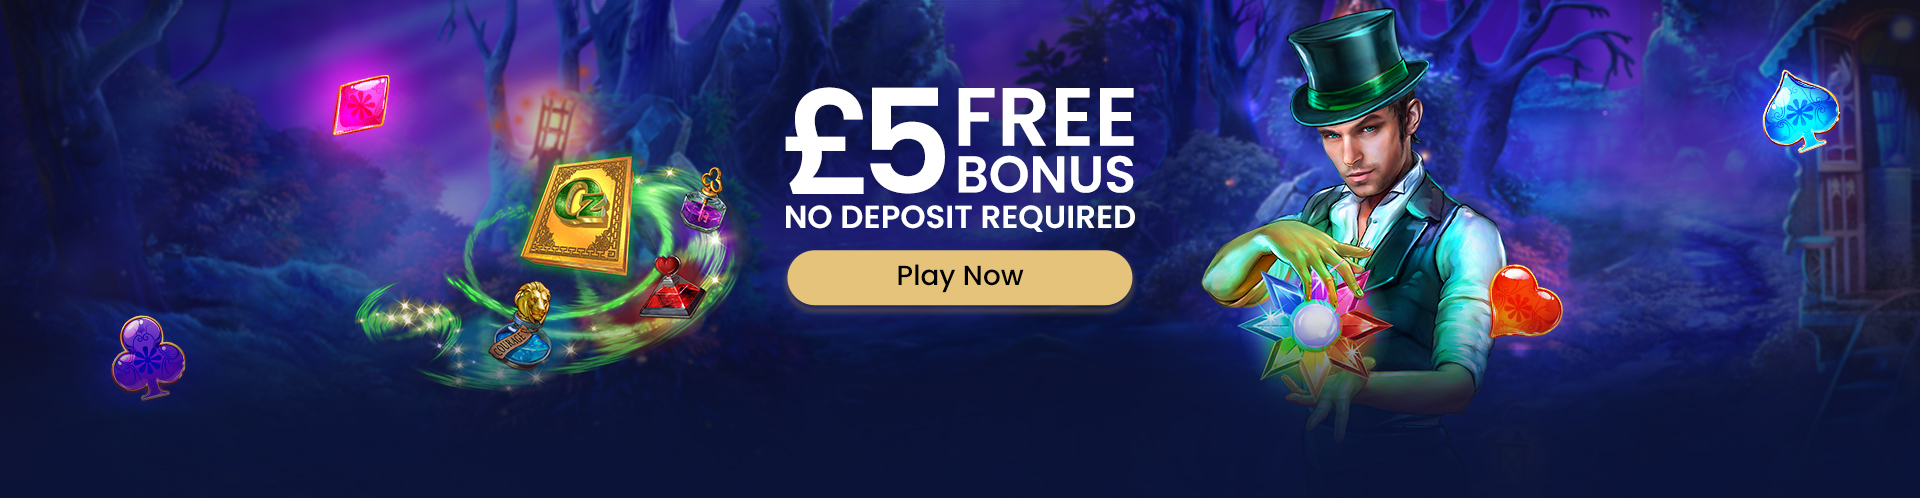 Play Casino With Mobile Credit